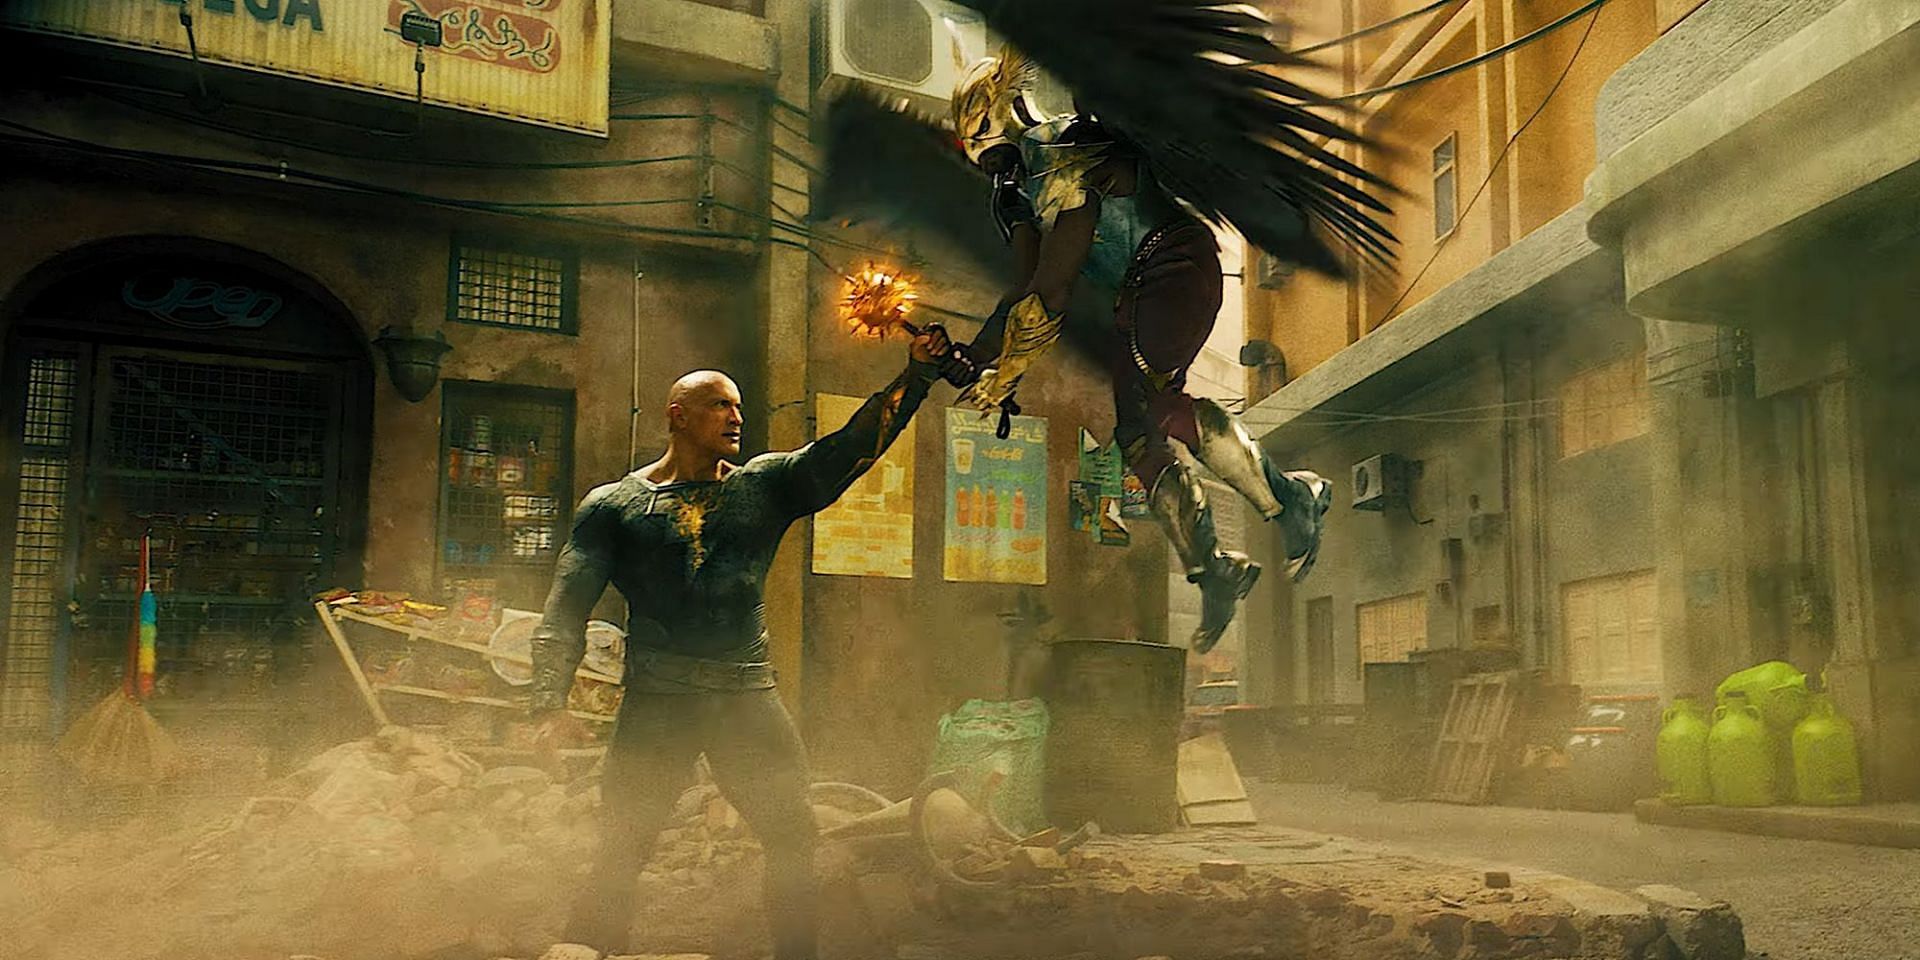 Videos] Black Adam is Number 1 For A Second Week In A Row At The Box Office